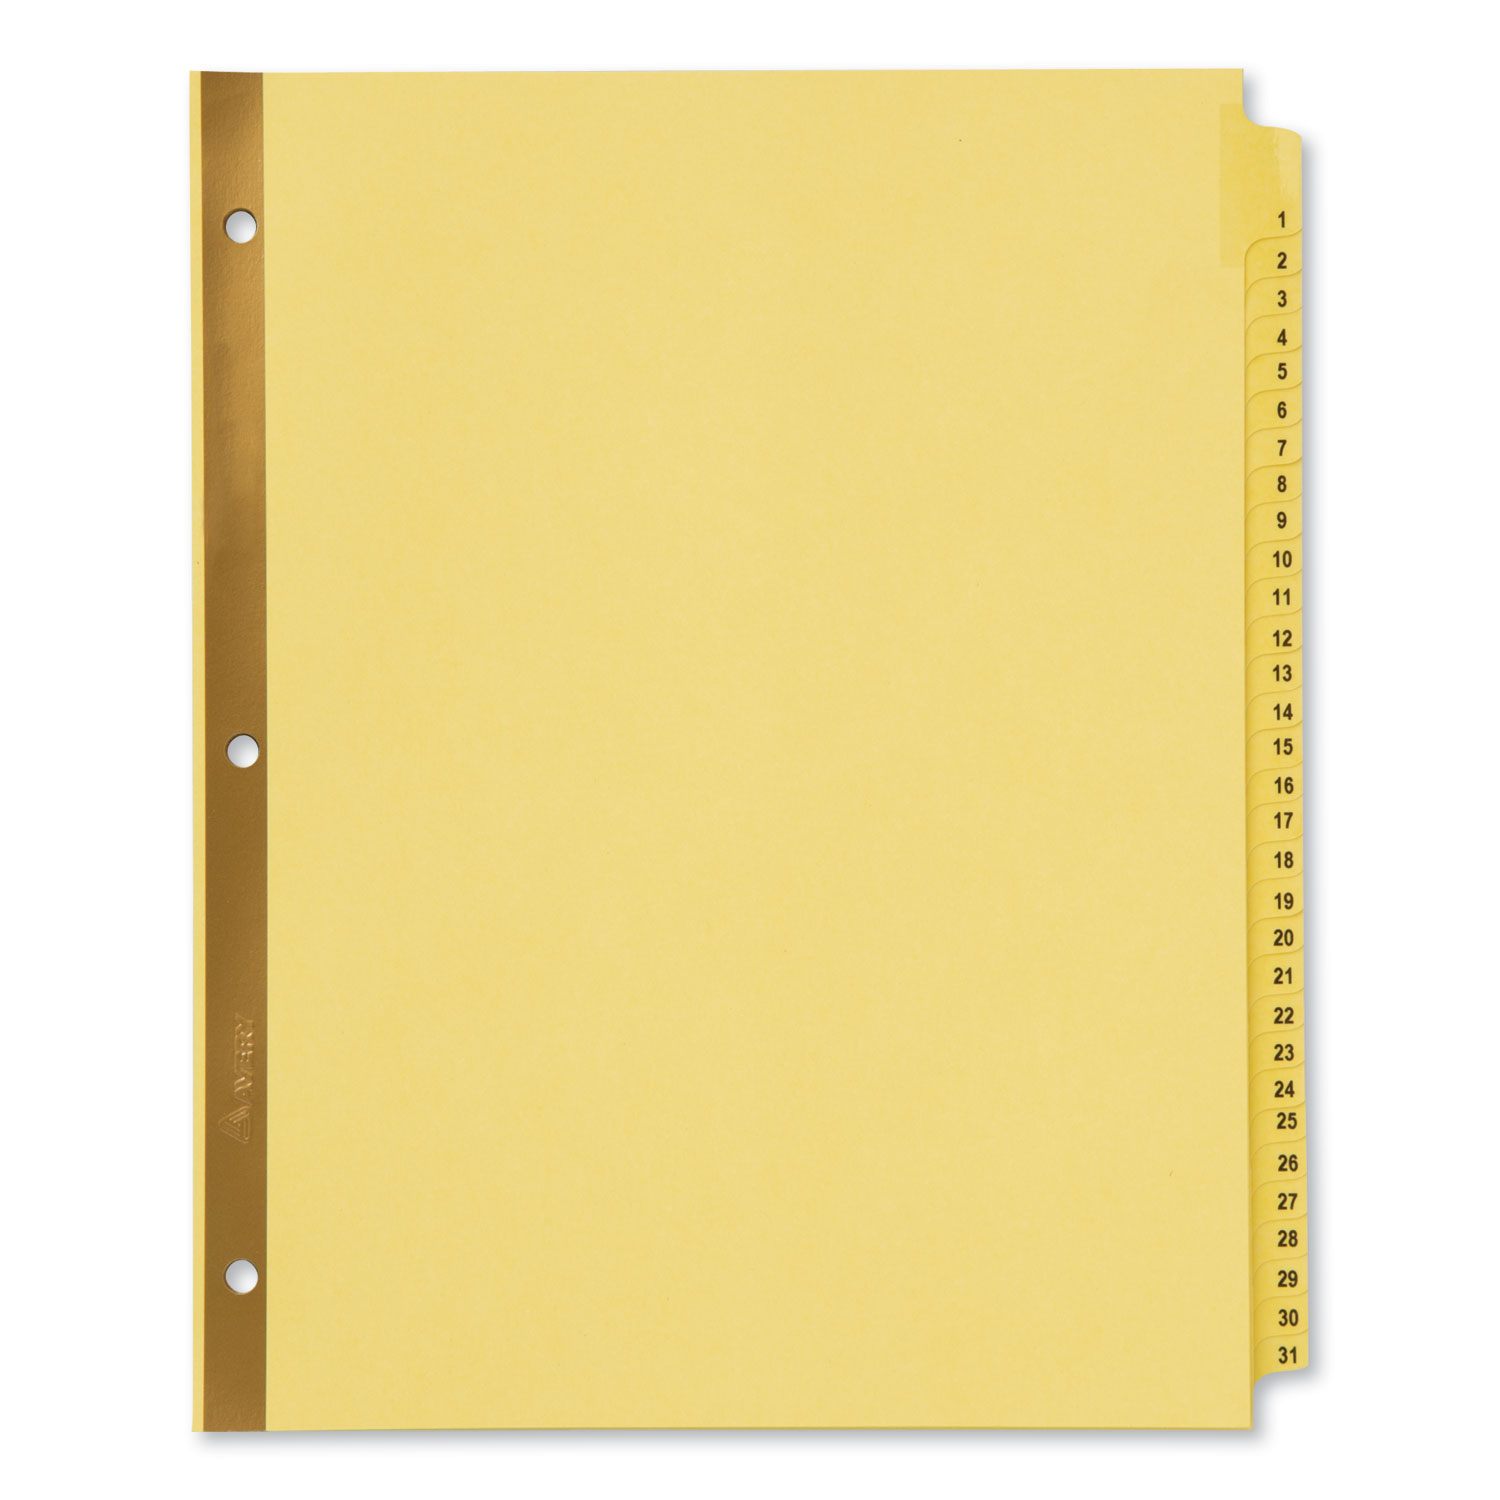  Avery 11308 Preprinted Laminated Tab Dividers w/Gold Reinforced Binding Edge, 31-Tab, Letter (AVE11308) 